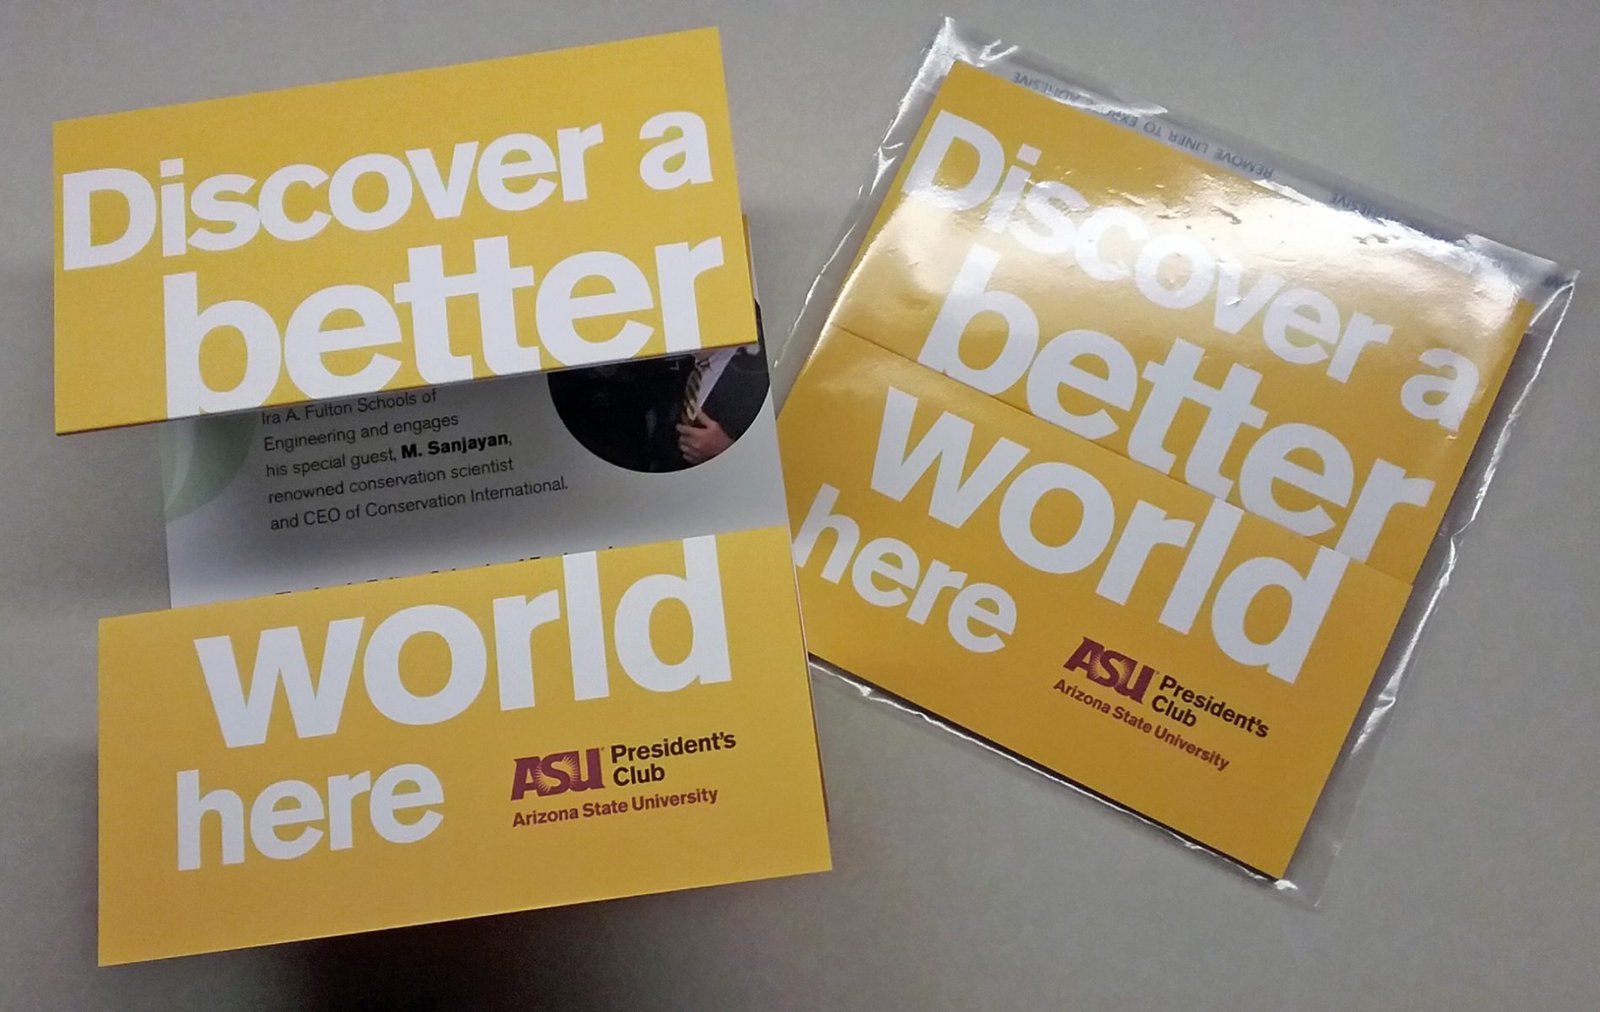 ASU-Presidents-Club-Discover-Better-World